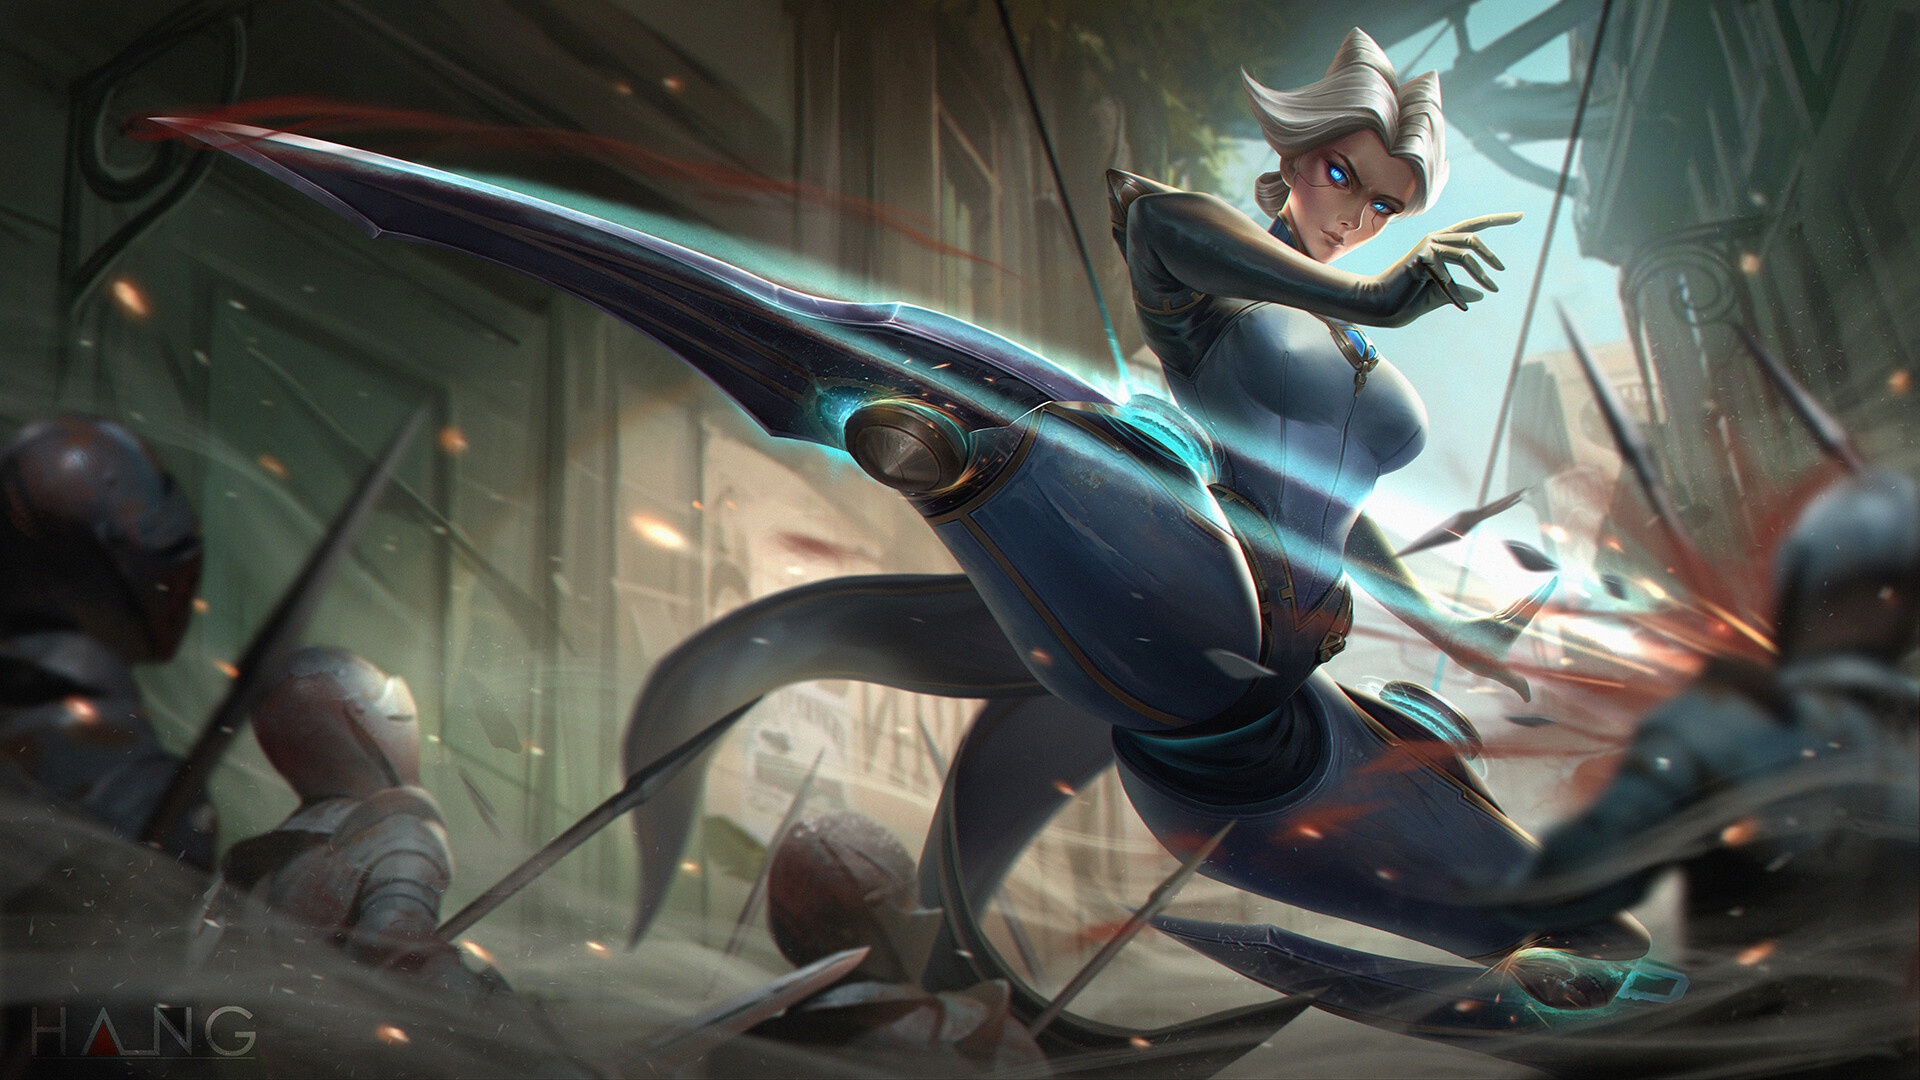 General 1920x1080 PC gaming fantasy girl League of Legends Camille (League of Legends)